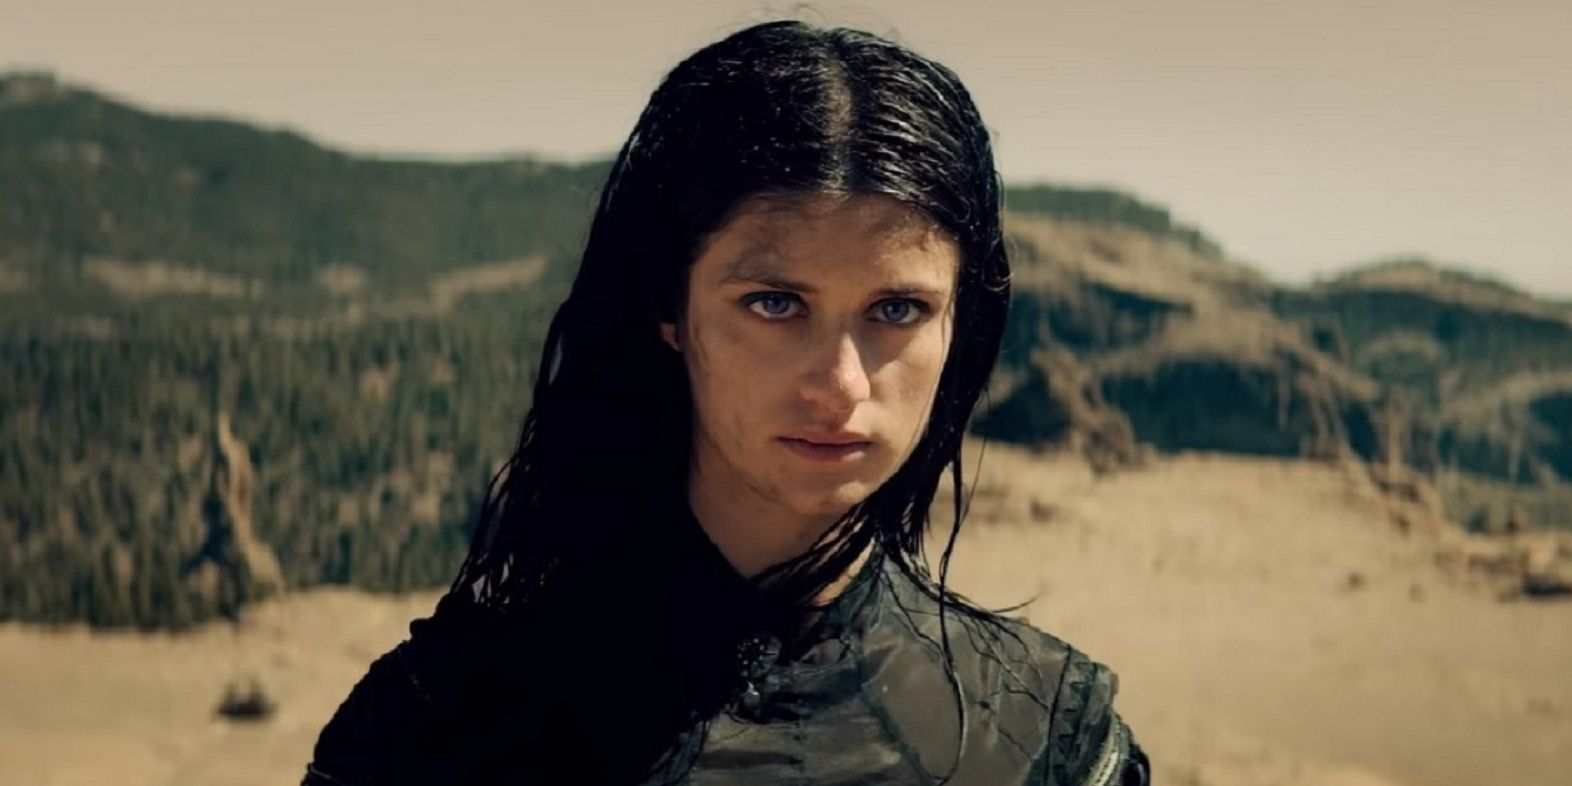 Anya Chalotra As Yennefer In The Witcher Netflix Series